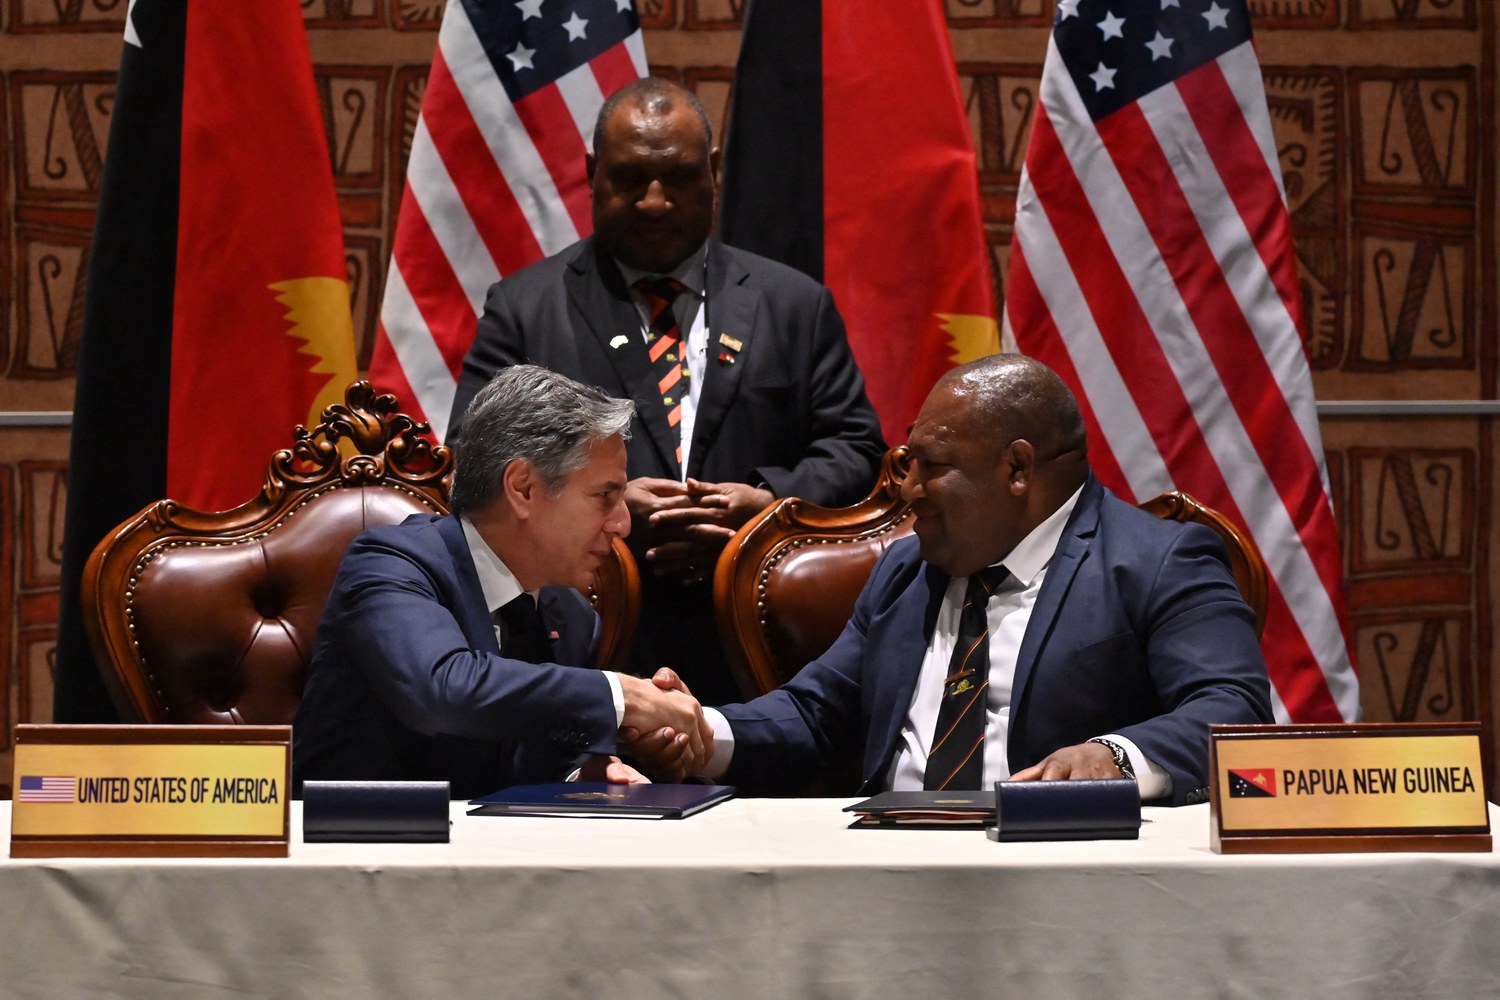 Officials from the US and Papua New Guinea sign a cooperation agreement. Photo: Misión Verdad.